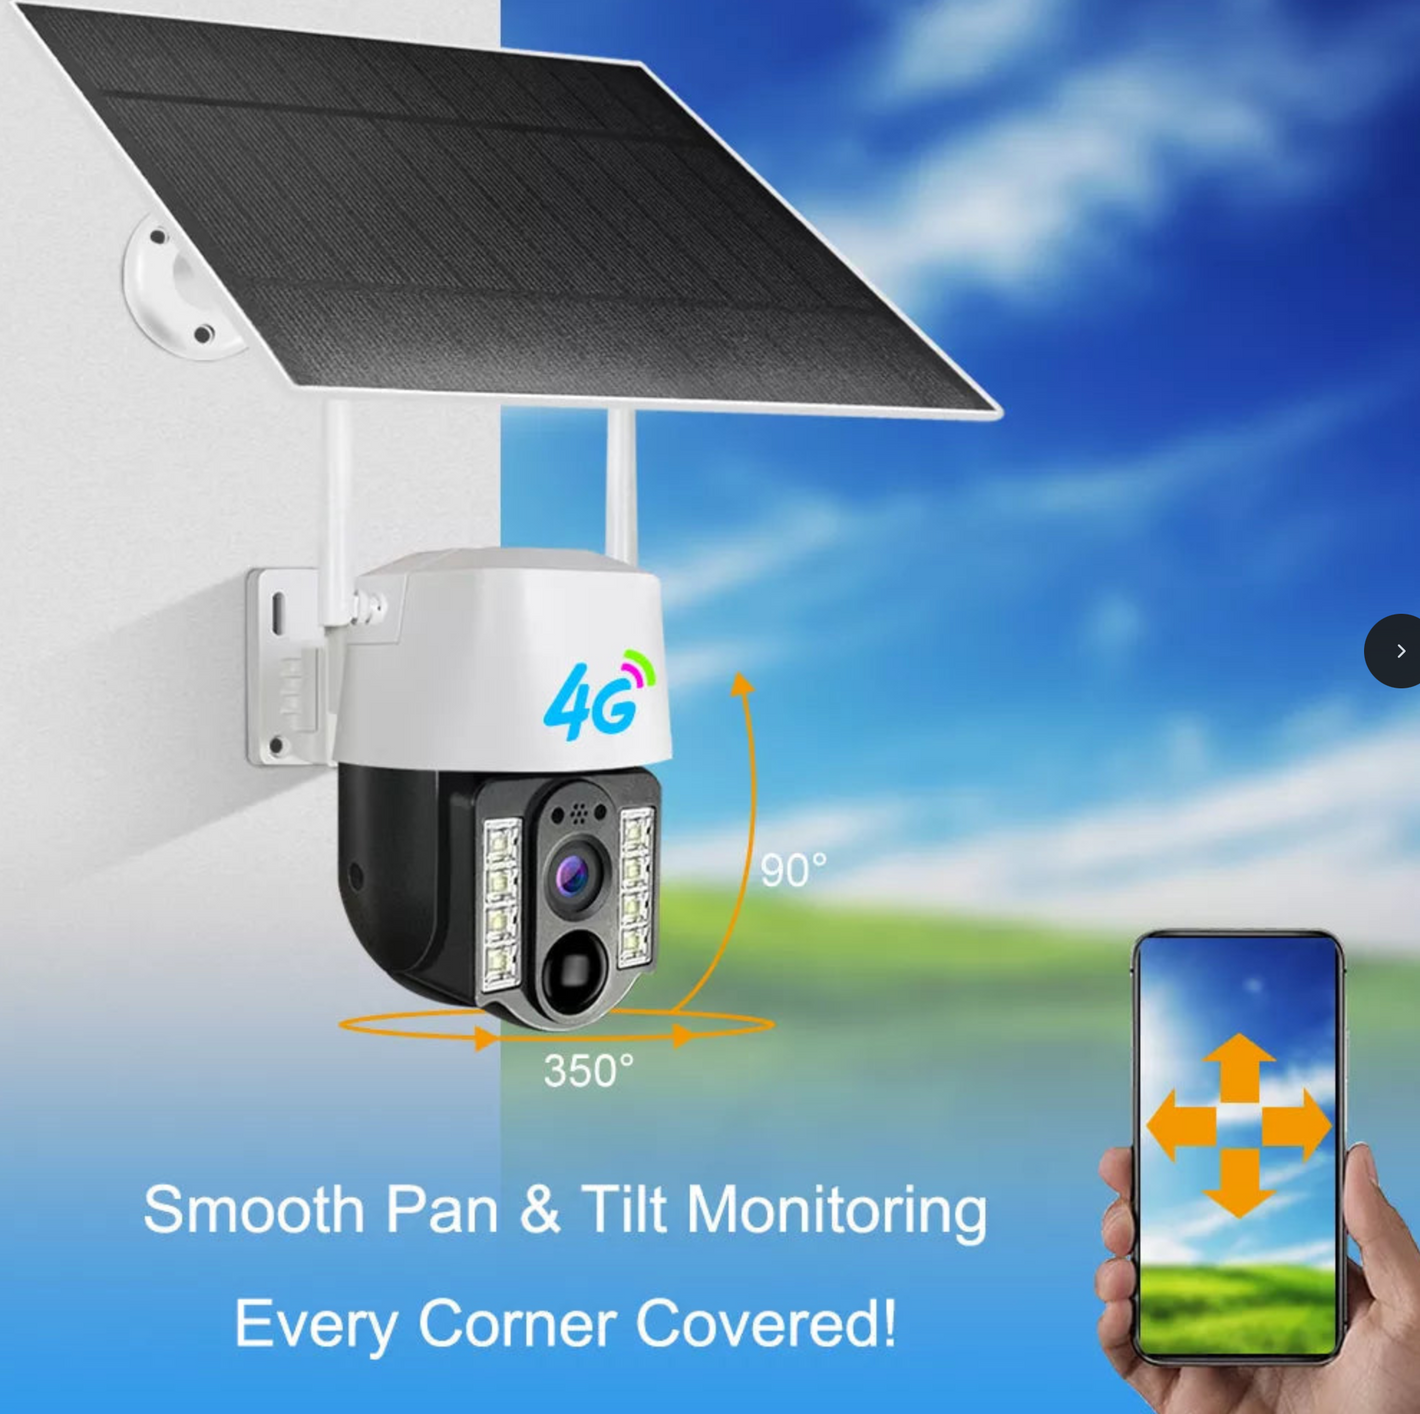 Security cameras, safety and protection